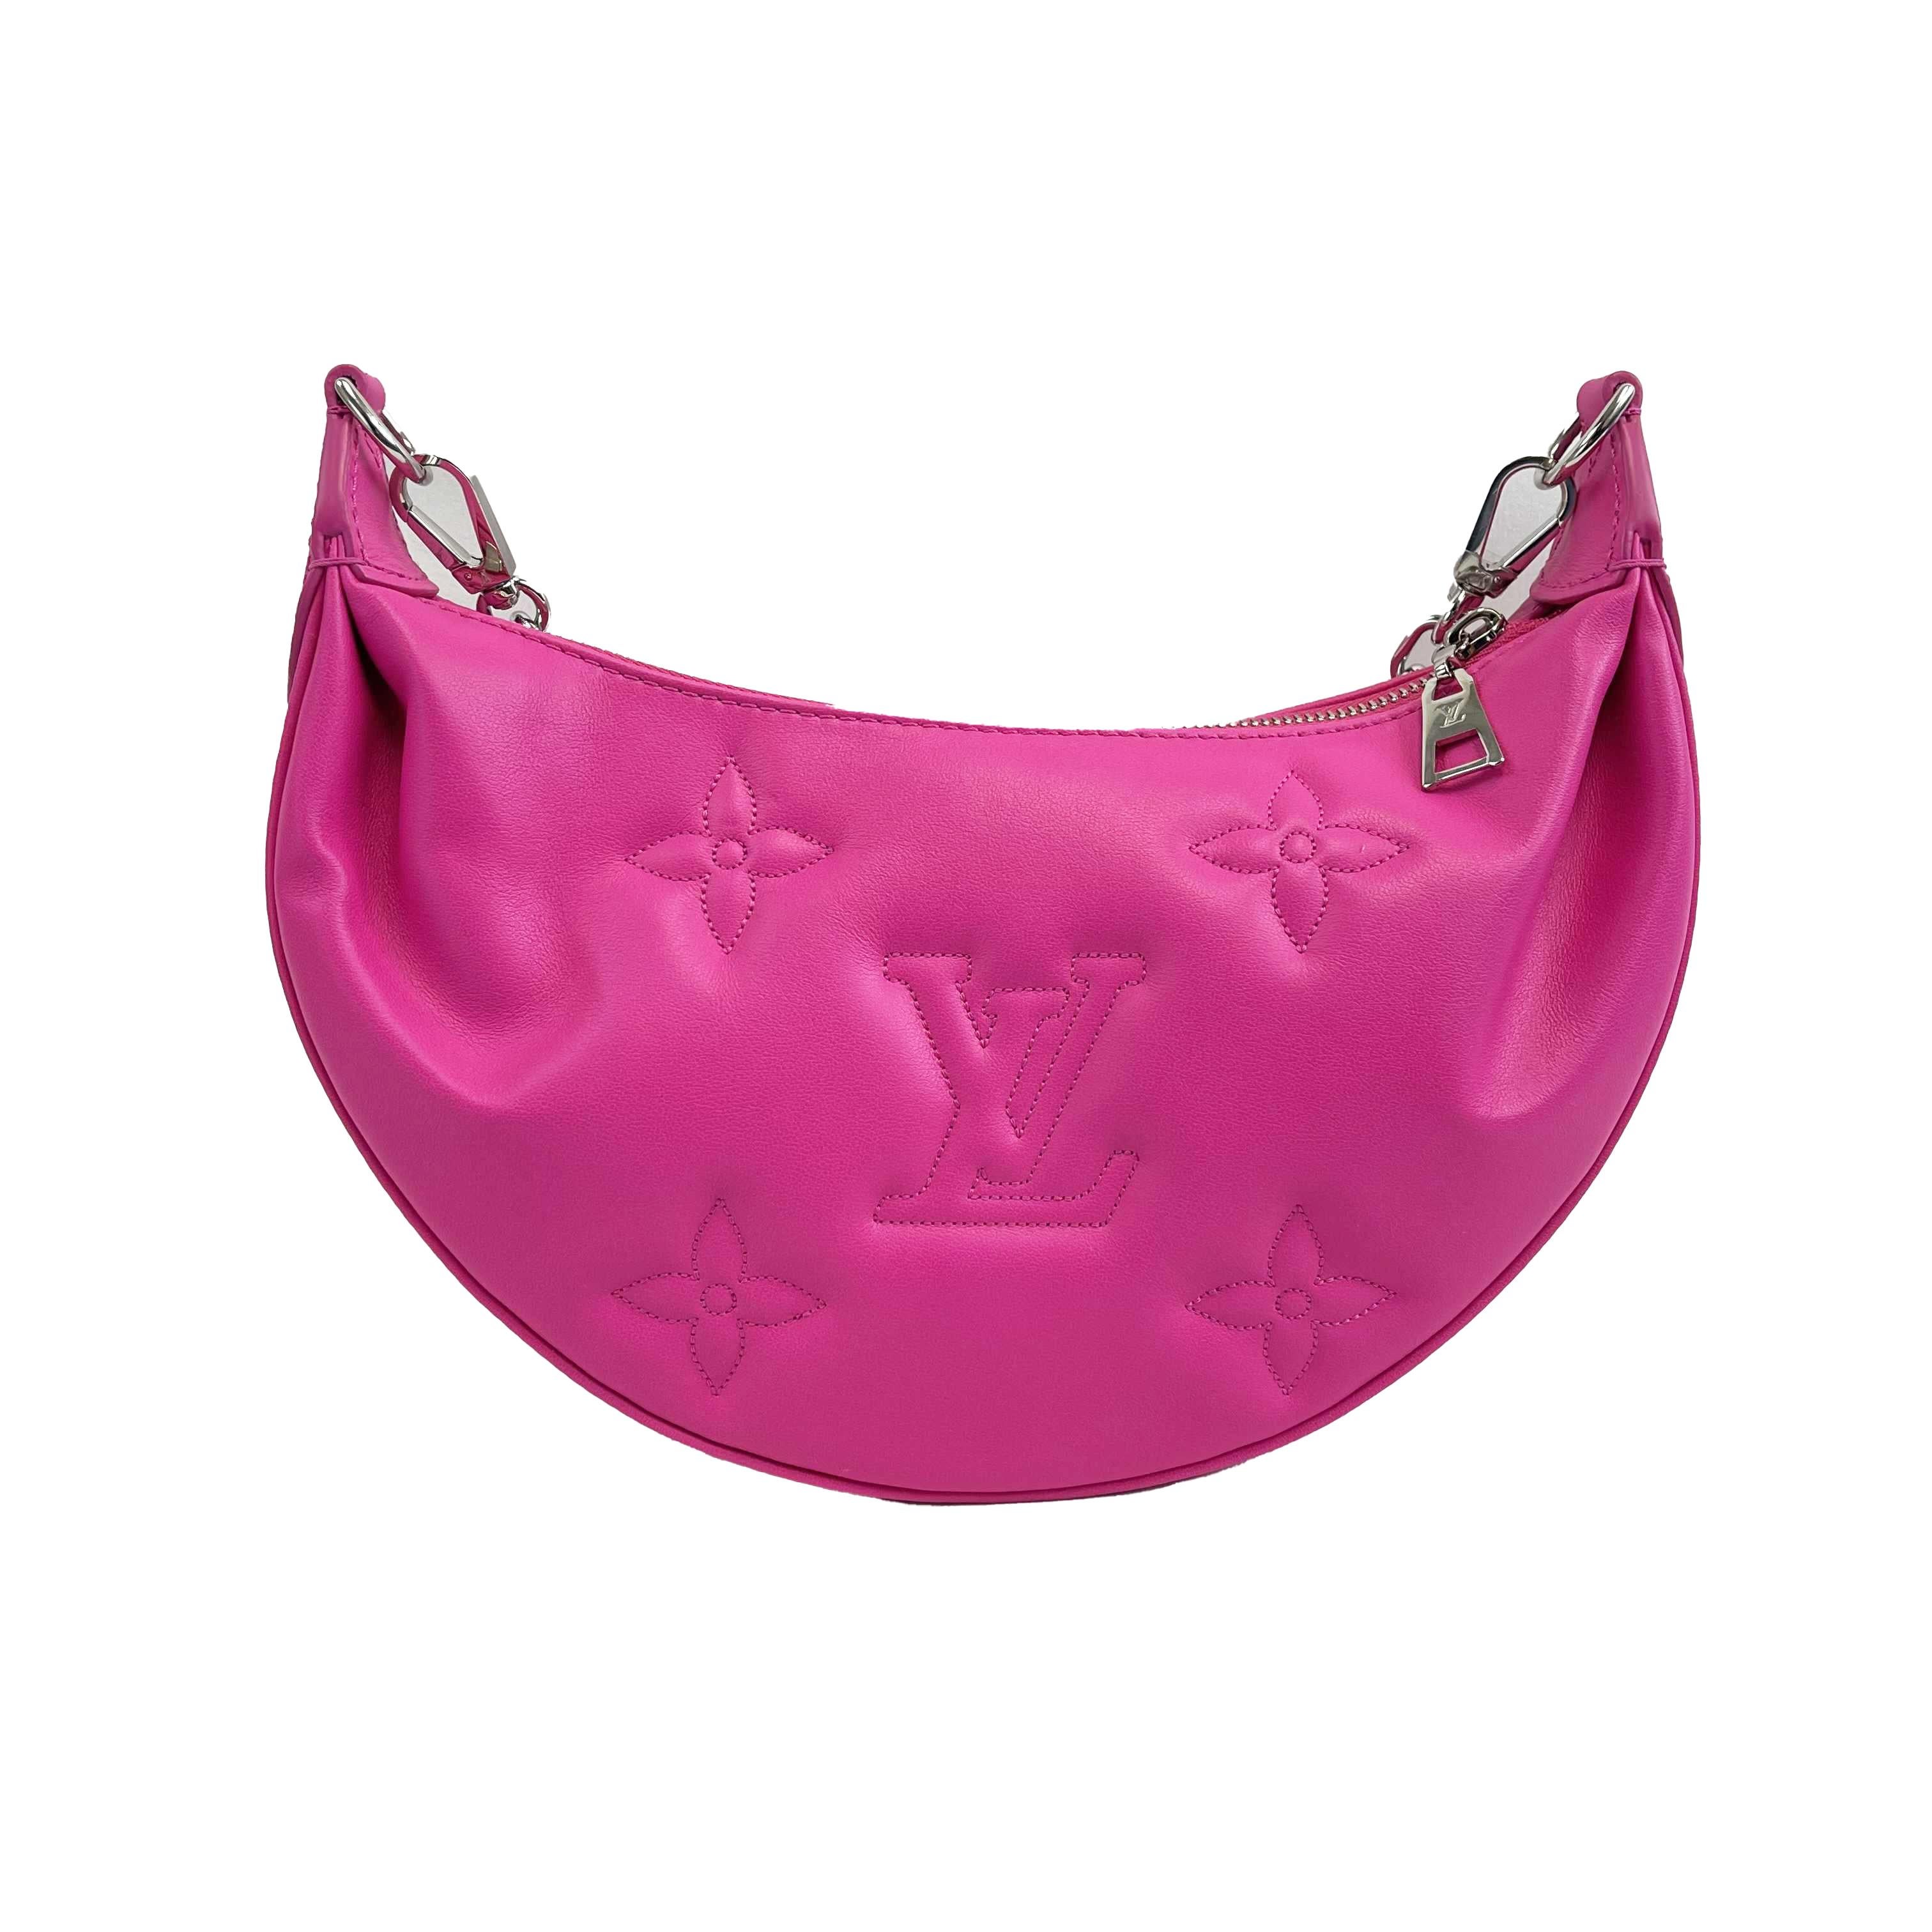 Louis Vuitton - New w/o Tags - Over the Moon - Pink - Handbag

Description

* Rose Miami Pink
* Quilted, embroidered smooth calf leather
* Removable silver chain strap
* Silver hardware
* Zipper closure
* Pink fabric interior
* Interior flat